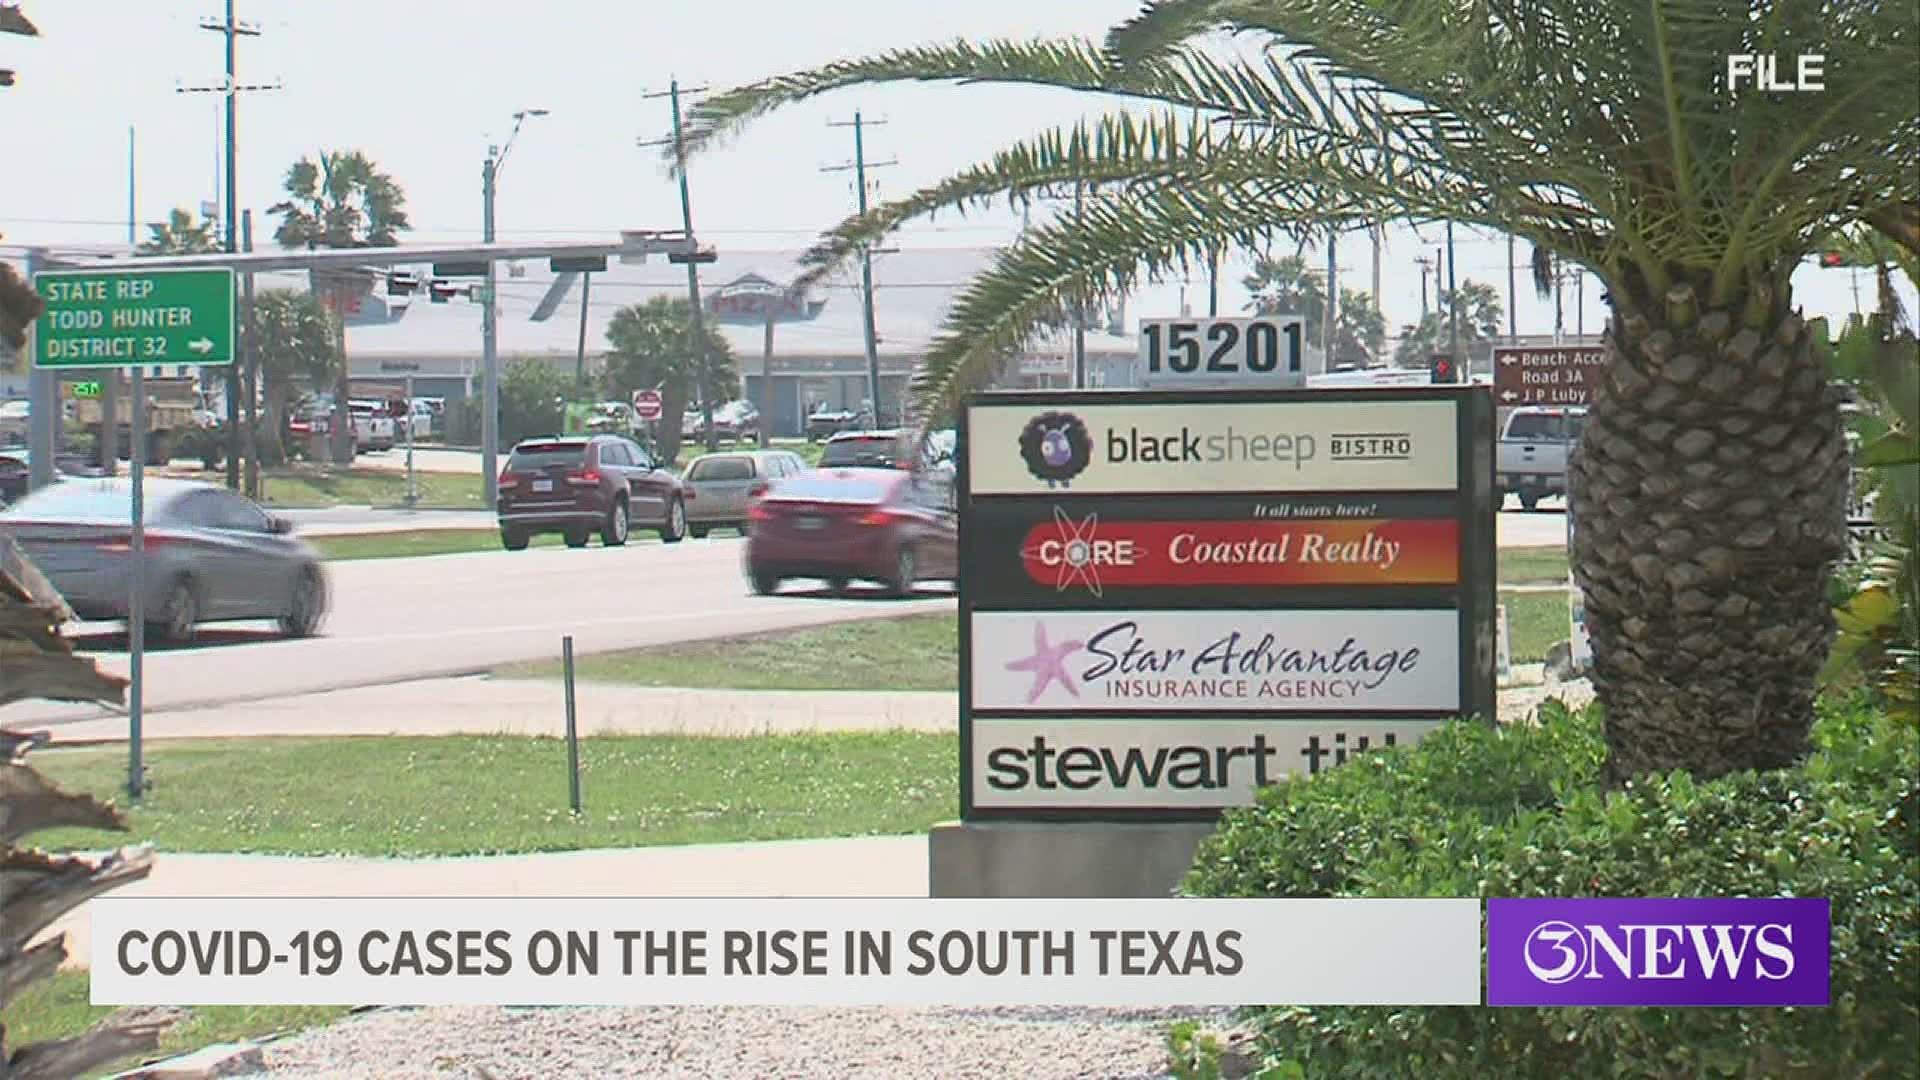 As we continue to see COVID-19 case numbers rise in the Coastal Bend, we are also seeing more hospitalizations.